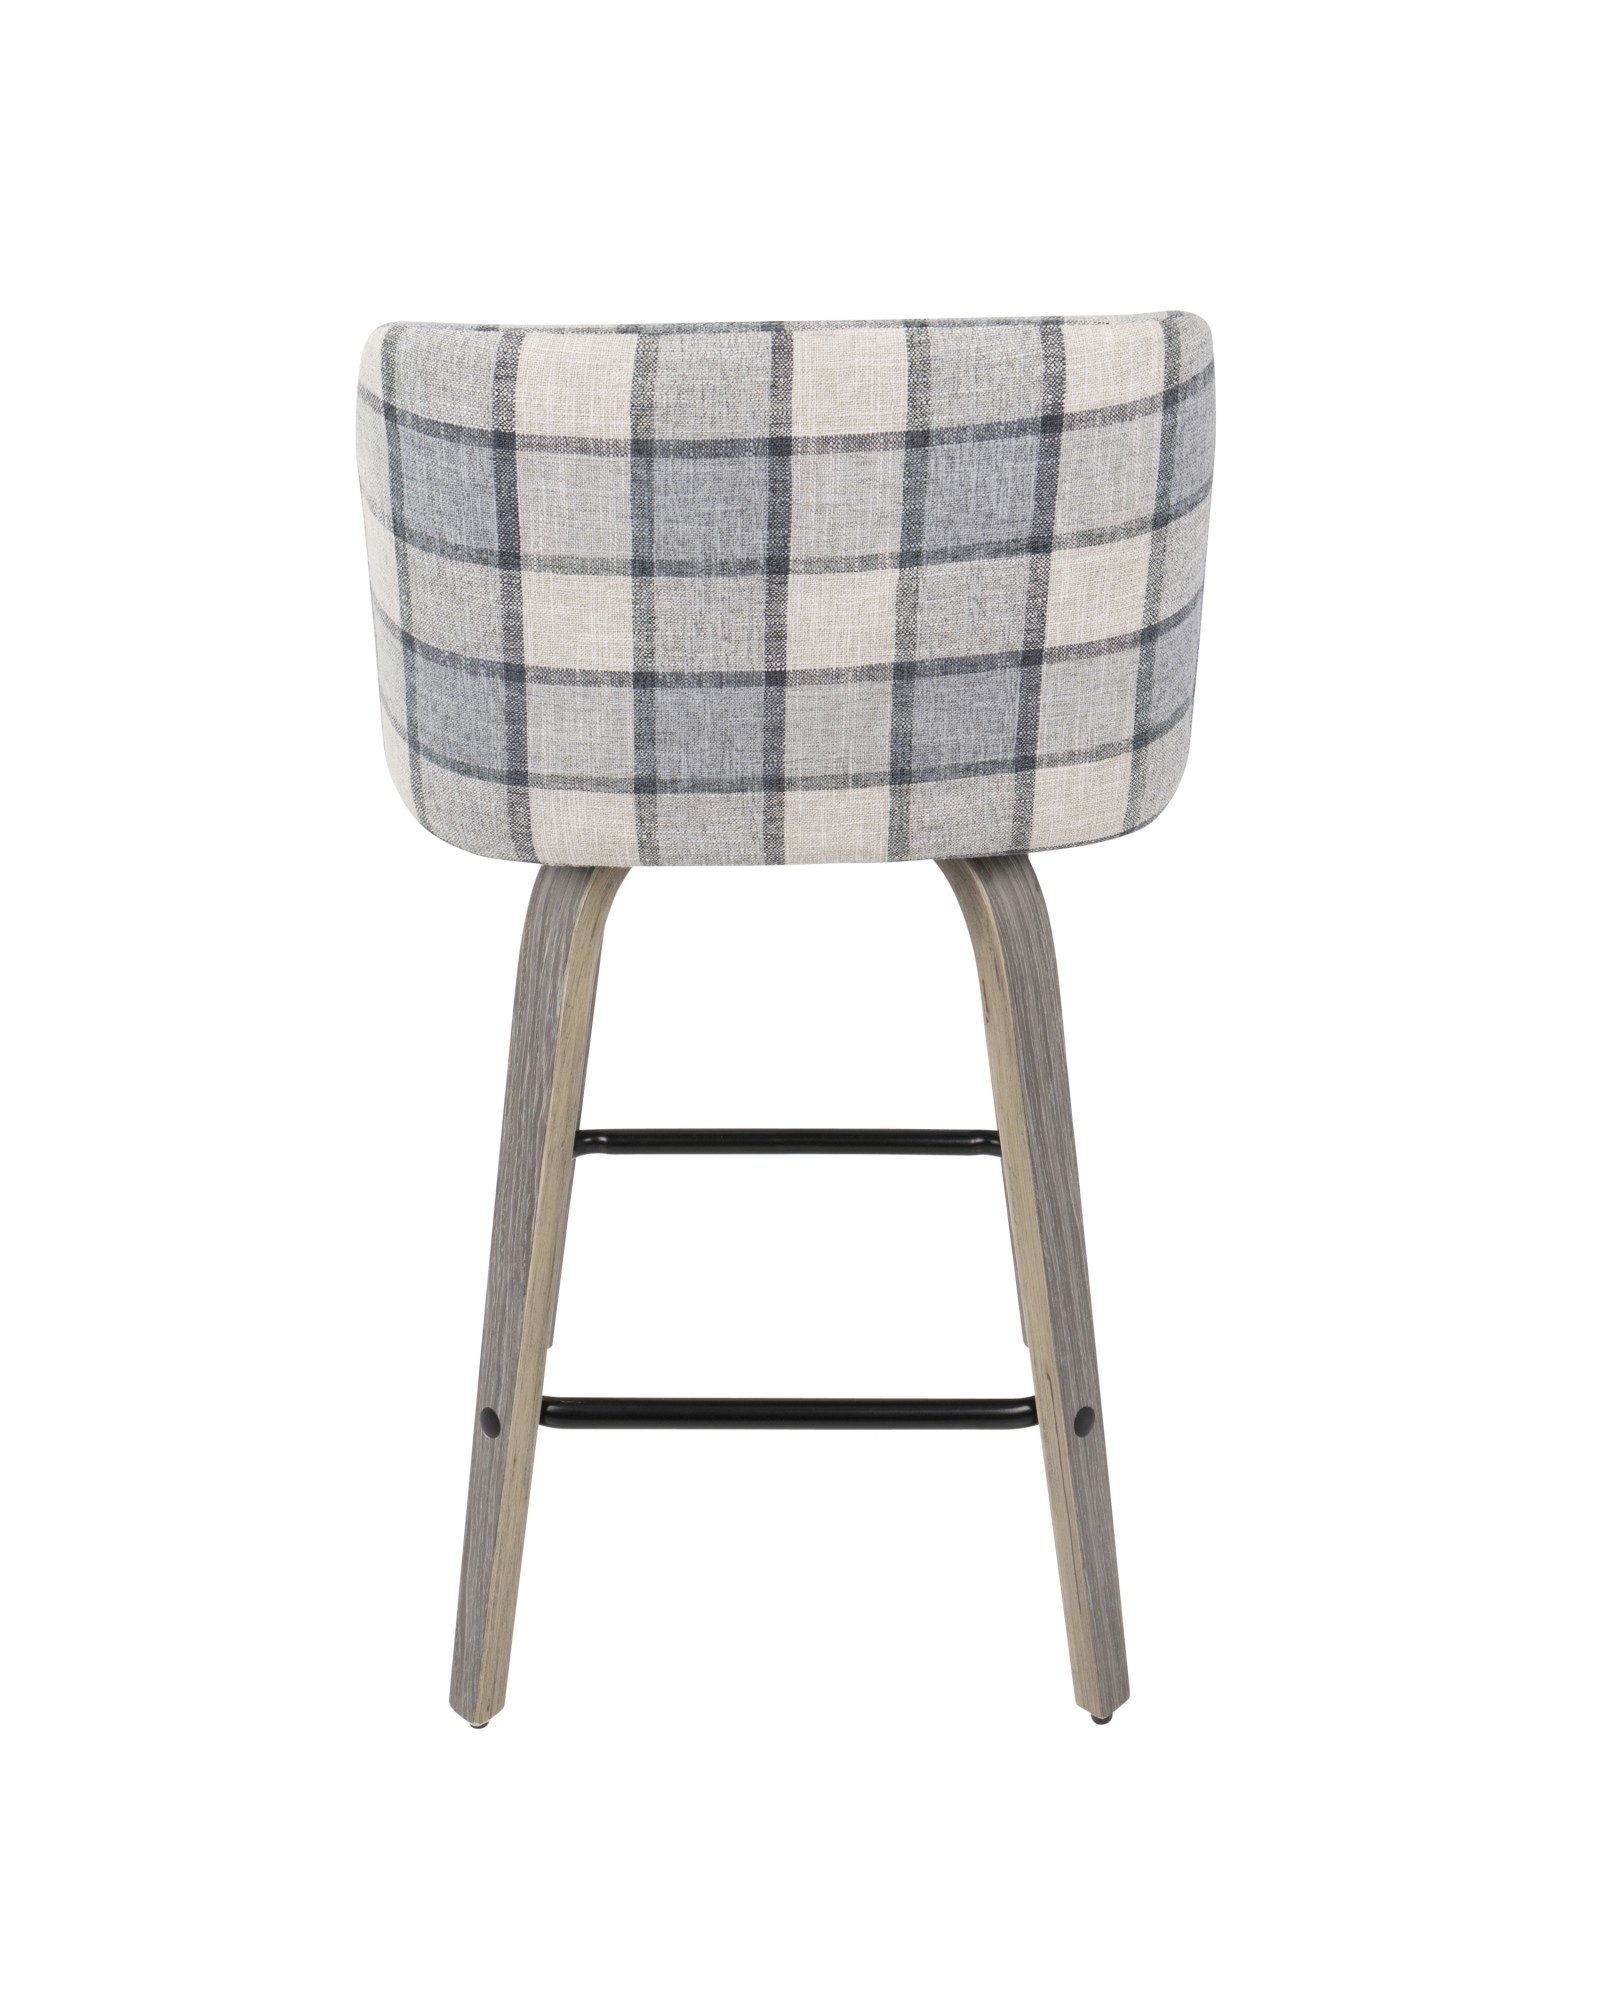 Toriano Mid-Century Modern Counter Stool in Light Grey Wood and Grey Plaid